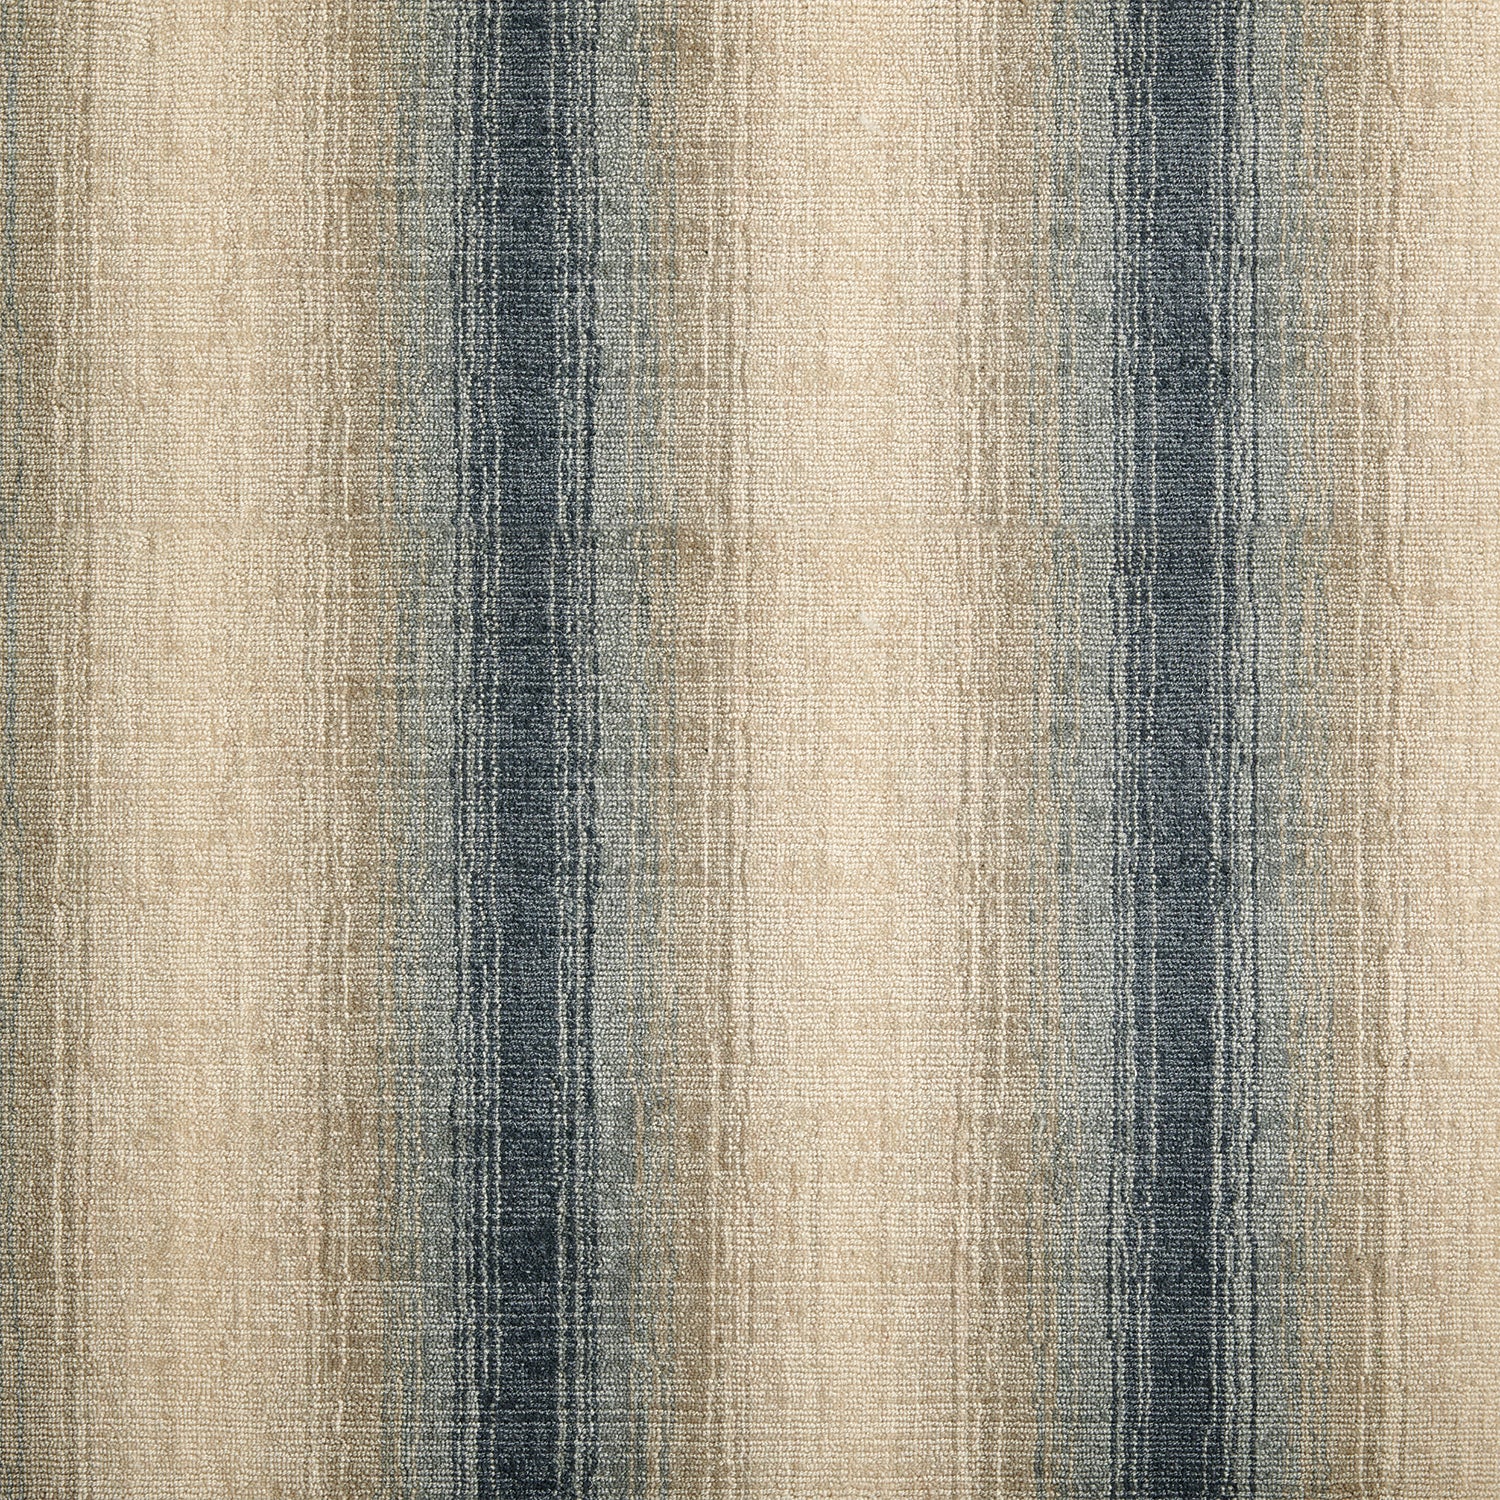 Wool-blend broadloom carpet swatch in an ombré stripe print in shades of cream, tan and gray-blue.